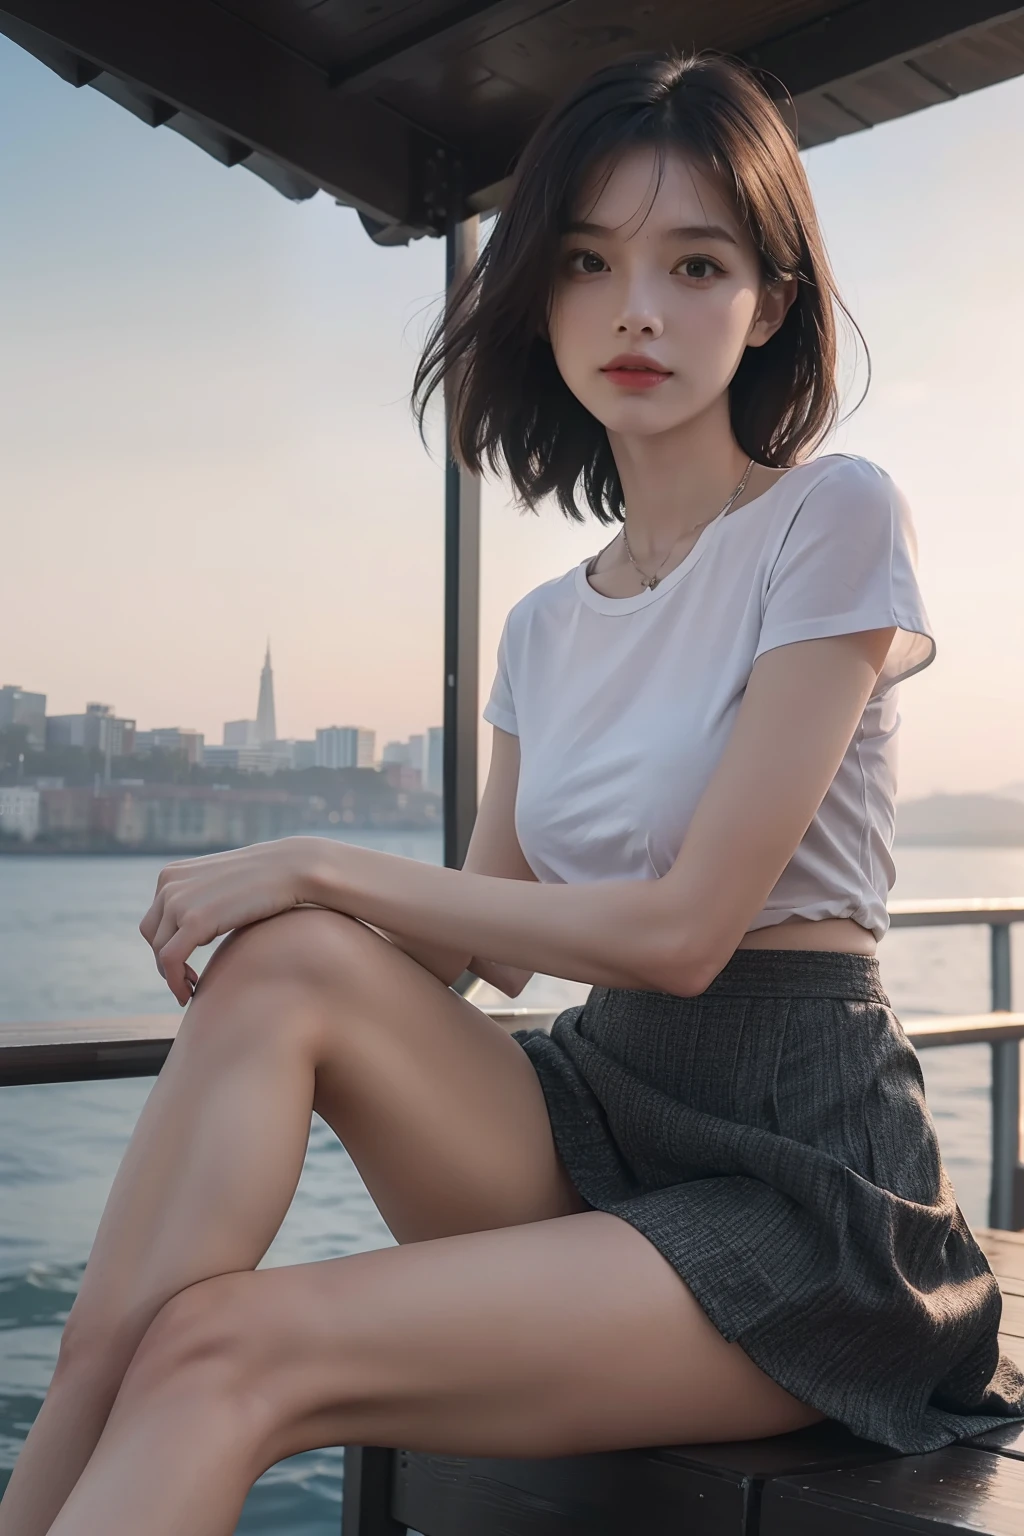 (full bodyesbian:1.5)，(1girll:1.3),(view the viewer:1.4)，(anatomy correct:1.4),(Sitting by the sea:1.2),(Wear a short skirt:1.2),(Accurate and perfect face:1.3),(Long legs:1.3),hyper HD, Ray traching, reflective light， structurally correct, Award-Awarded, High detail, Fade-in and fade-out shadow contrast, Face lighting ，Cinematic lighting, Masterpiece, super detailing, High quality, High detail, Best quality, 16k，High contrast,